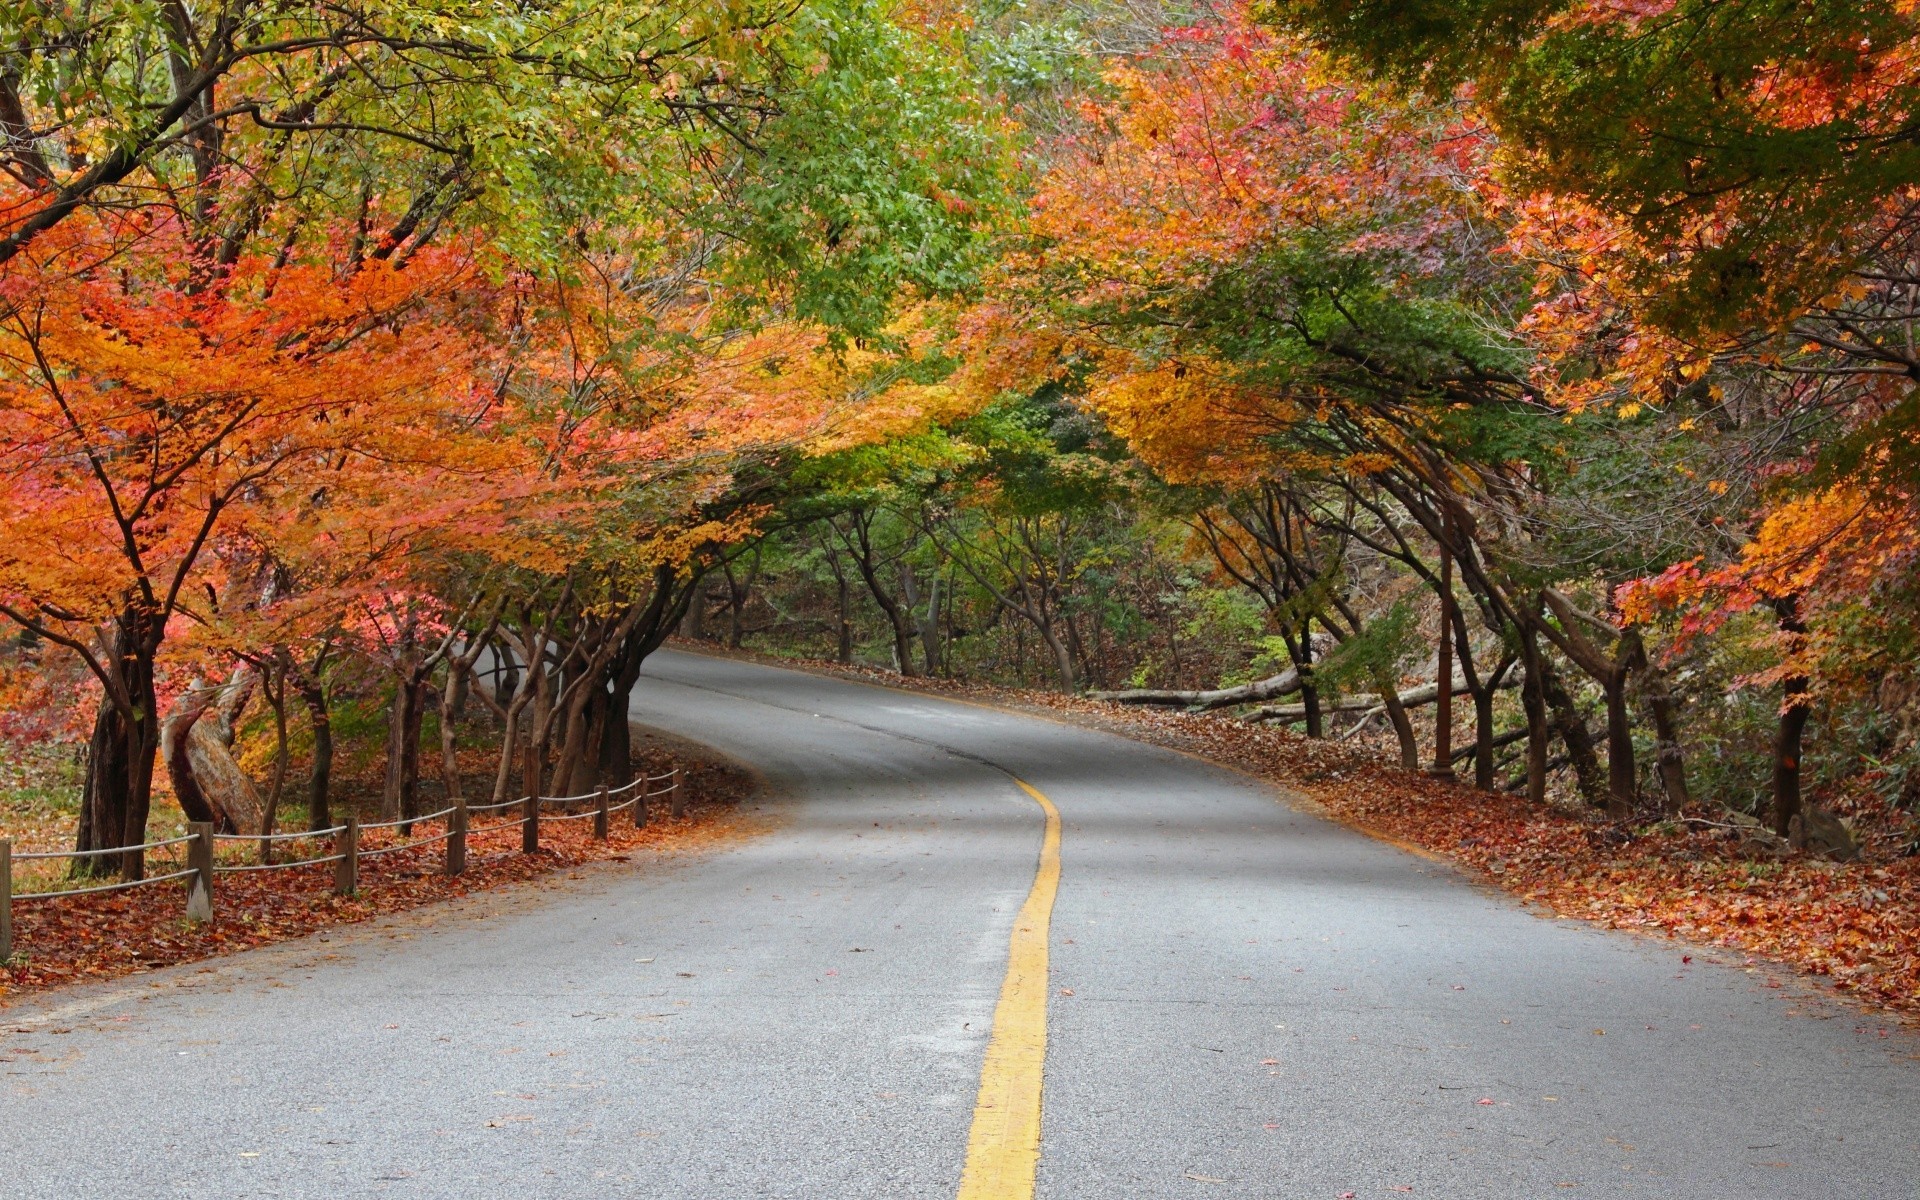 asia fall road leaf tree nature guidance landscape outdoors wood maple scenic park countryside rural